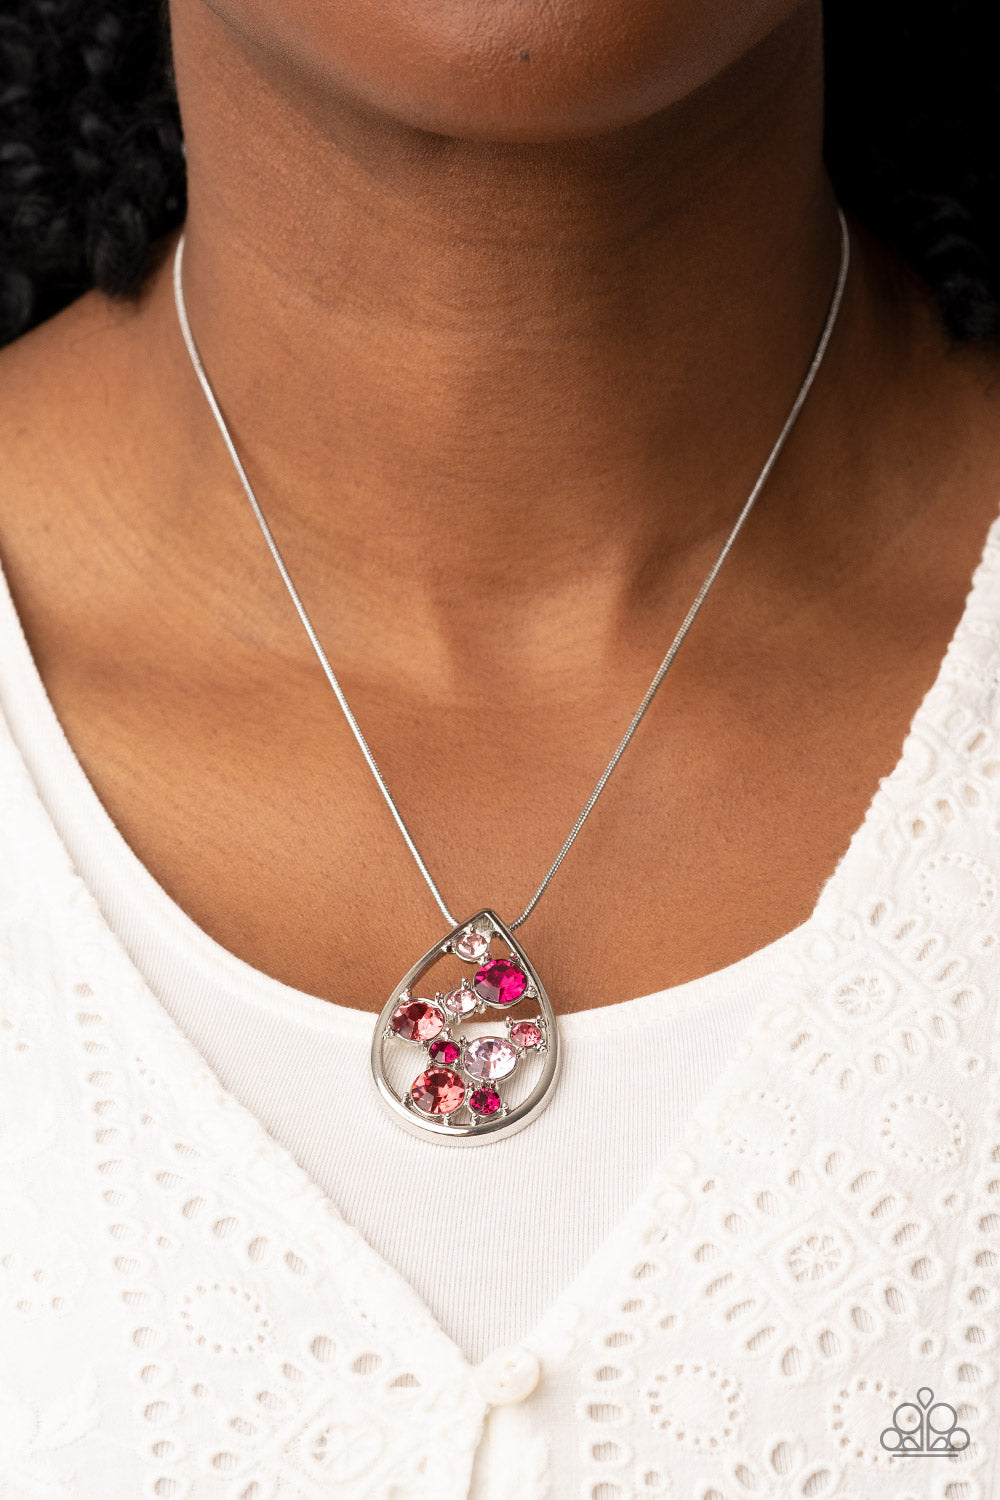 Paparazzi Accessories - Seasonal Sophistication - Pink Necklace